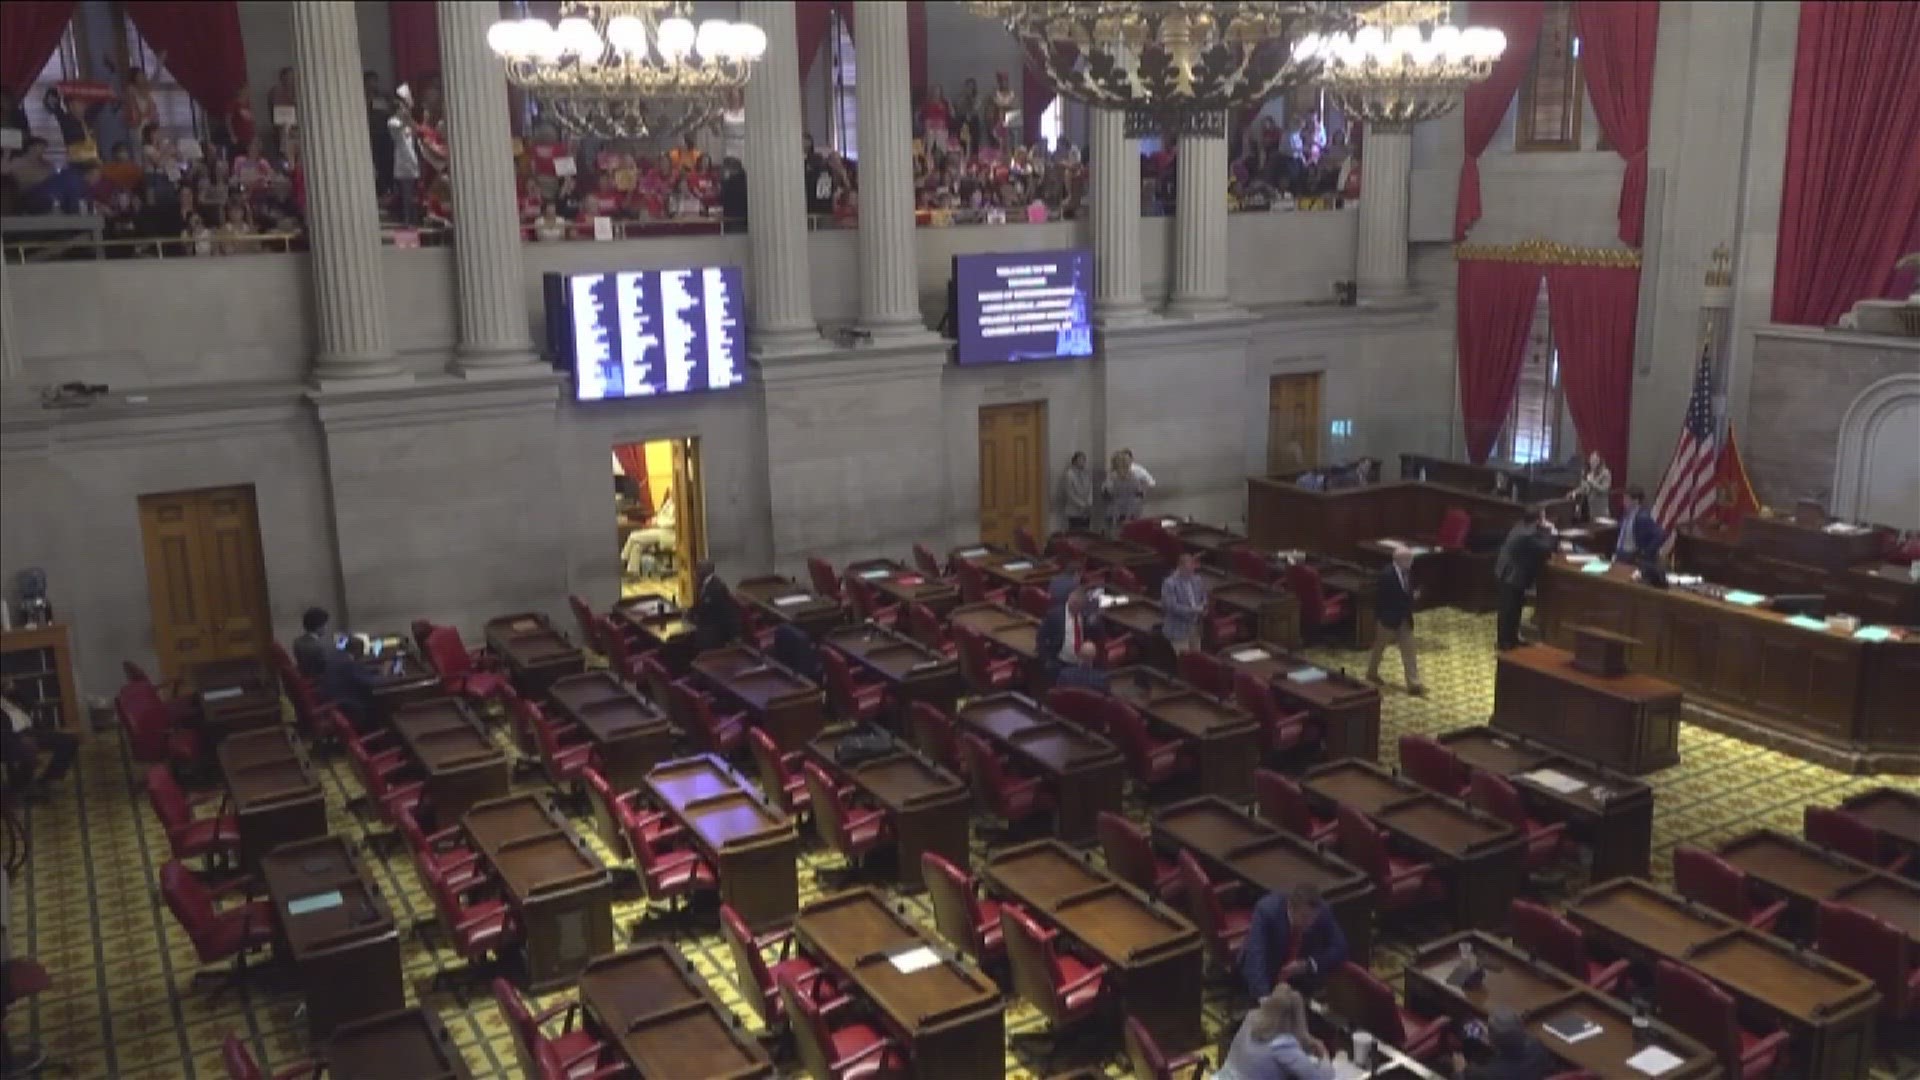 "The senate thumbed its collective nose at Lee's legislative wishlist, and legislative leaders basically told protestors to get lost," says analyst Otis Sanford.